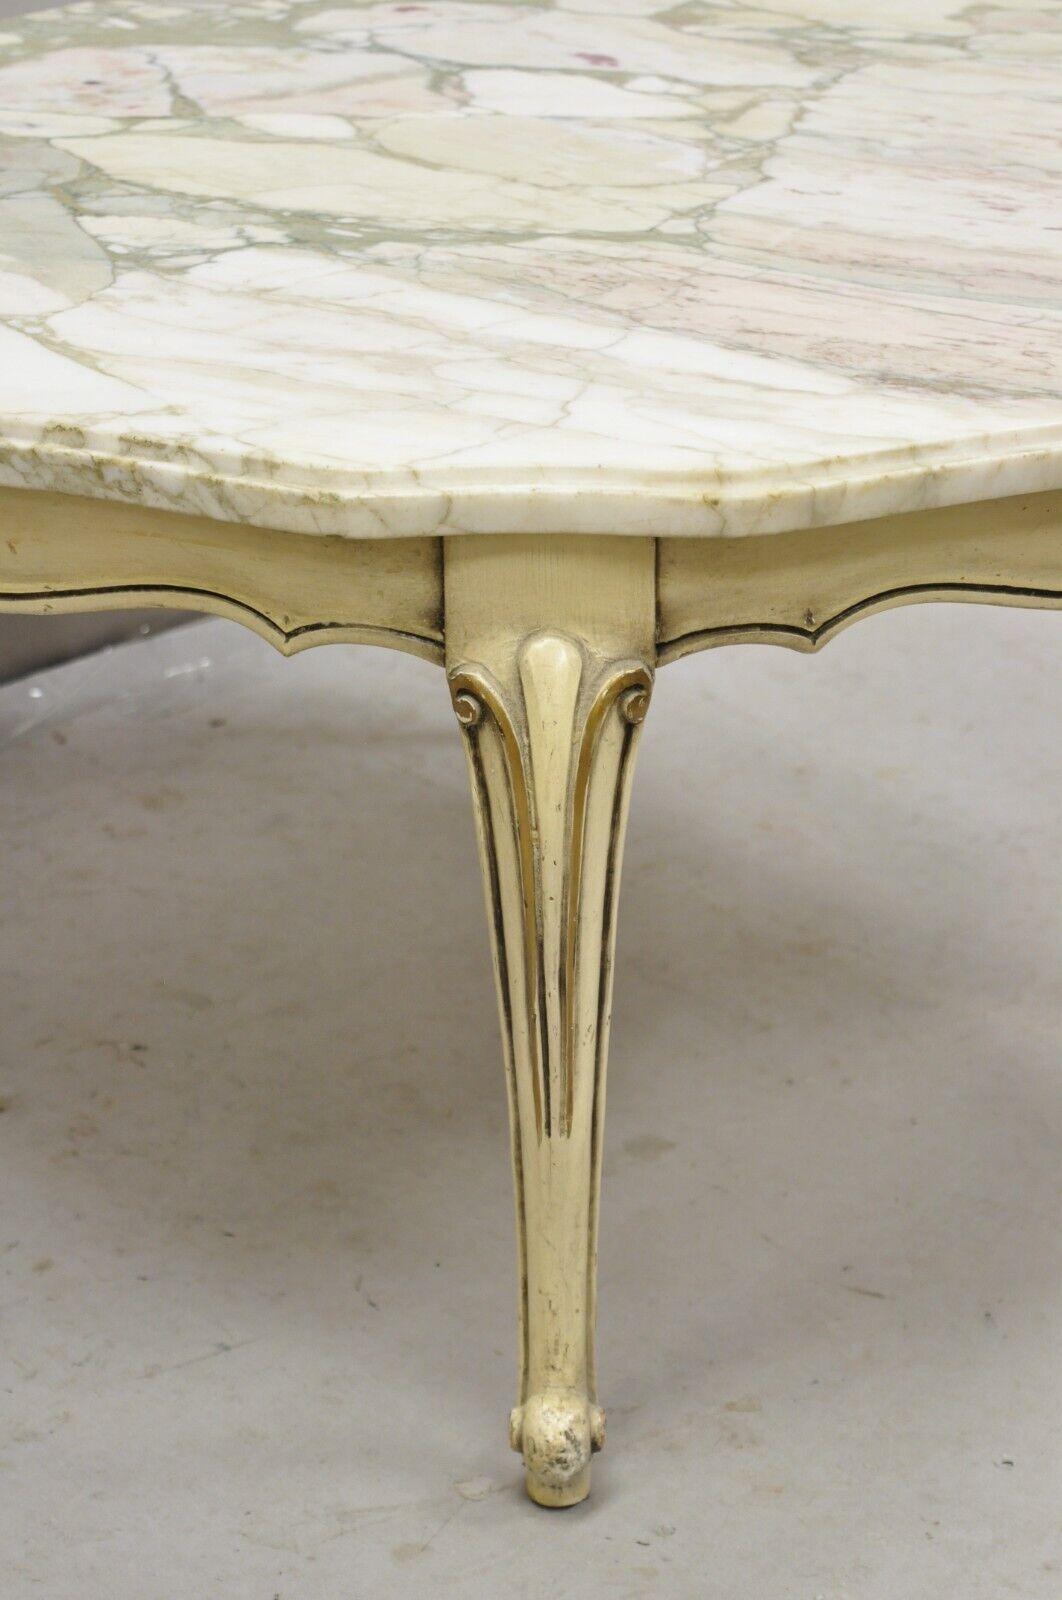 Vintage French Provincial Style Marble Top Cream Painted Round Coffee Table In Good Condition For Sale In Philadelphia, PA